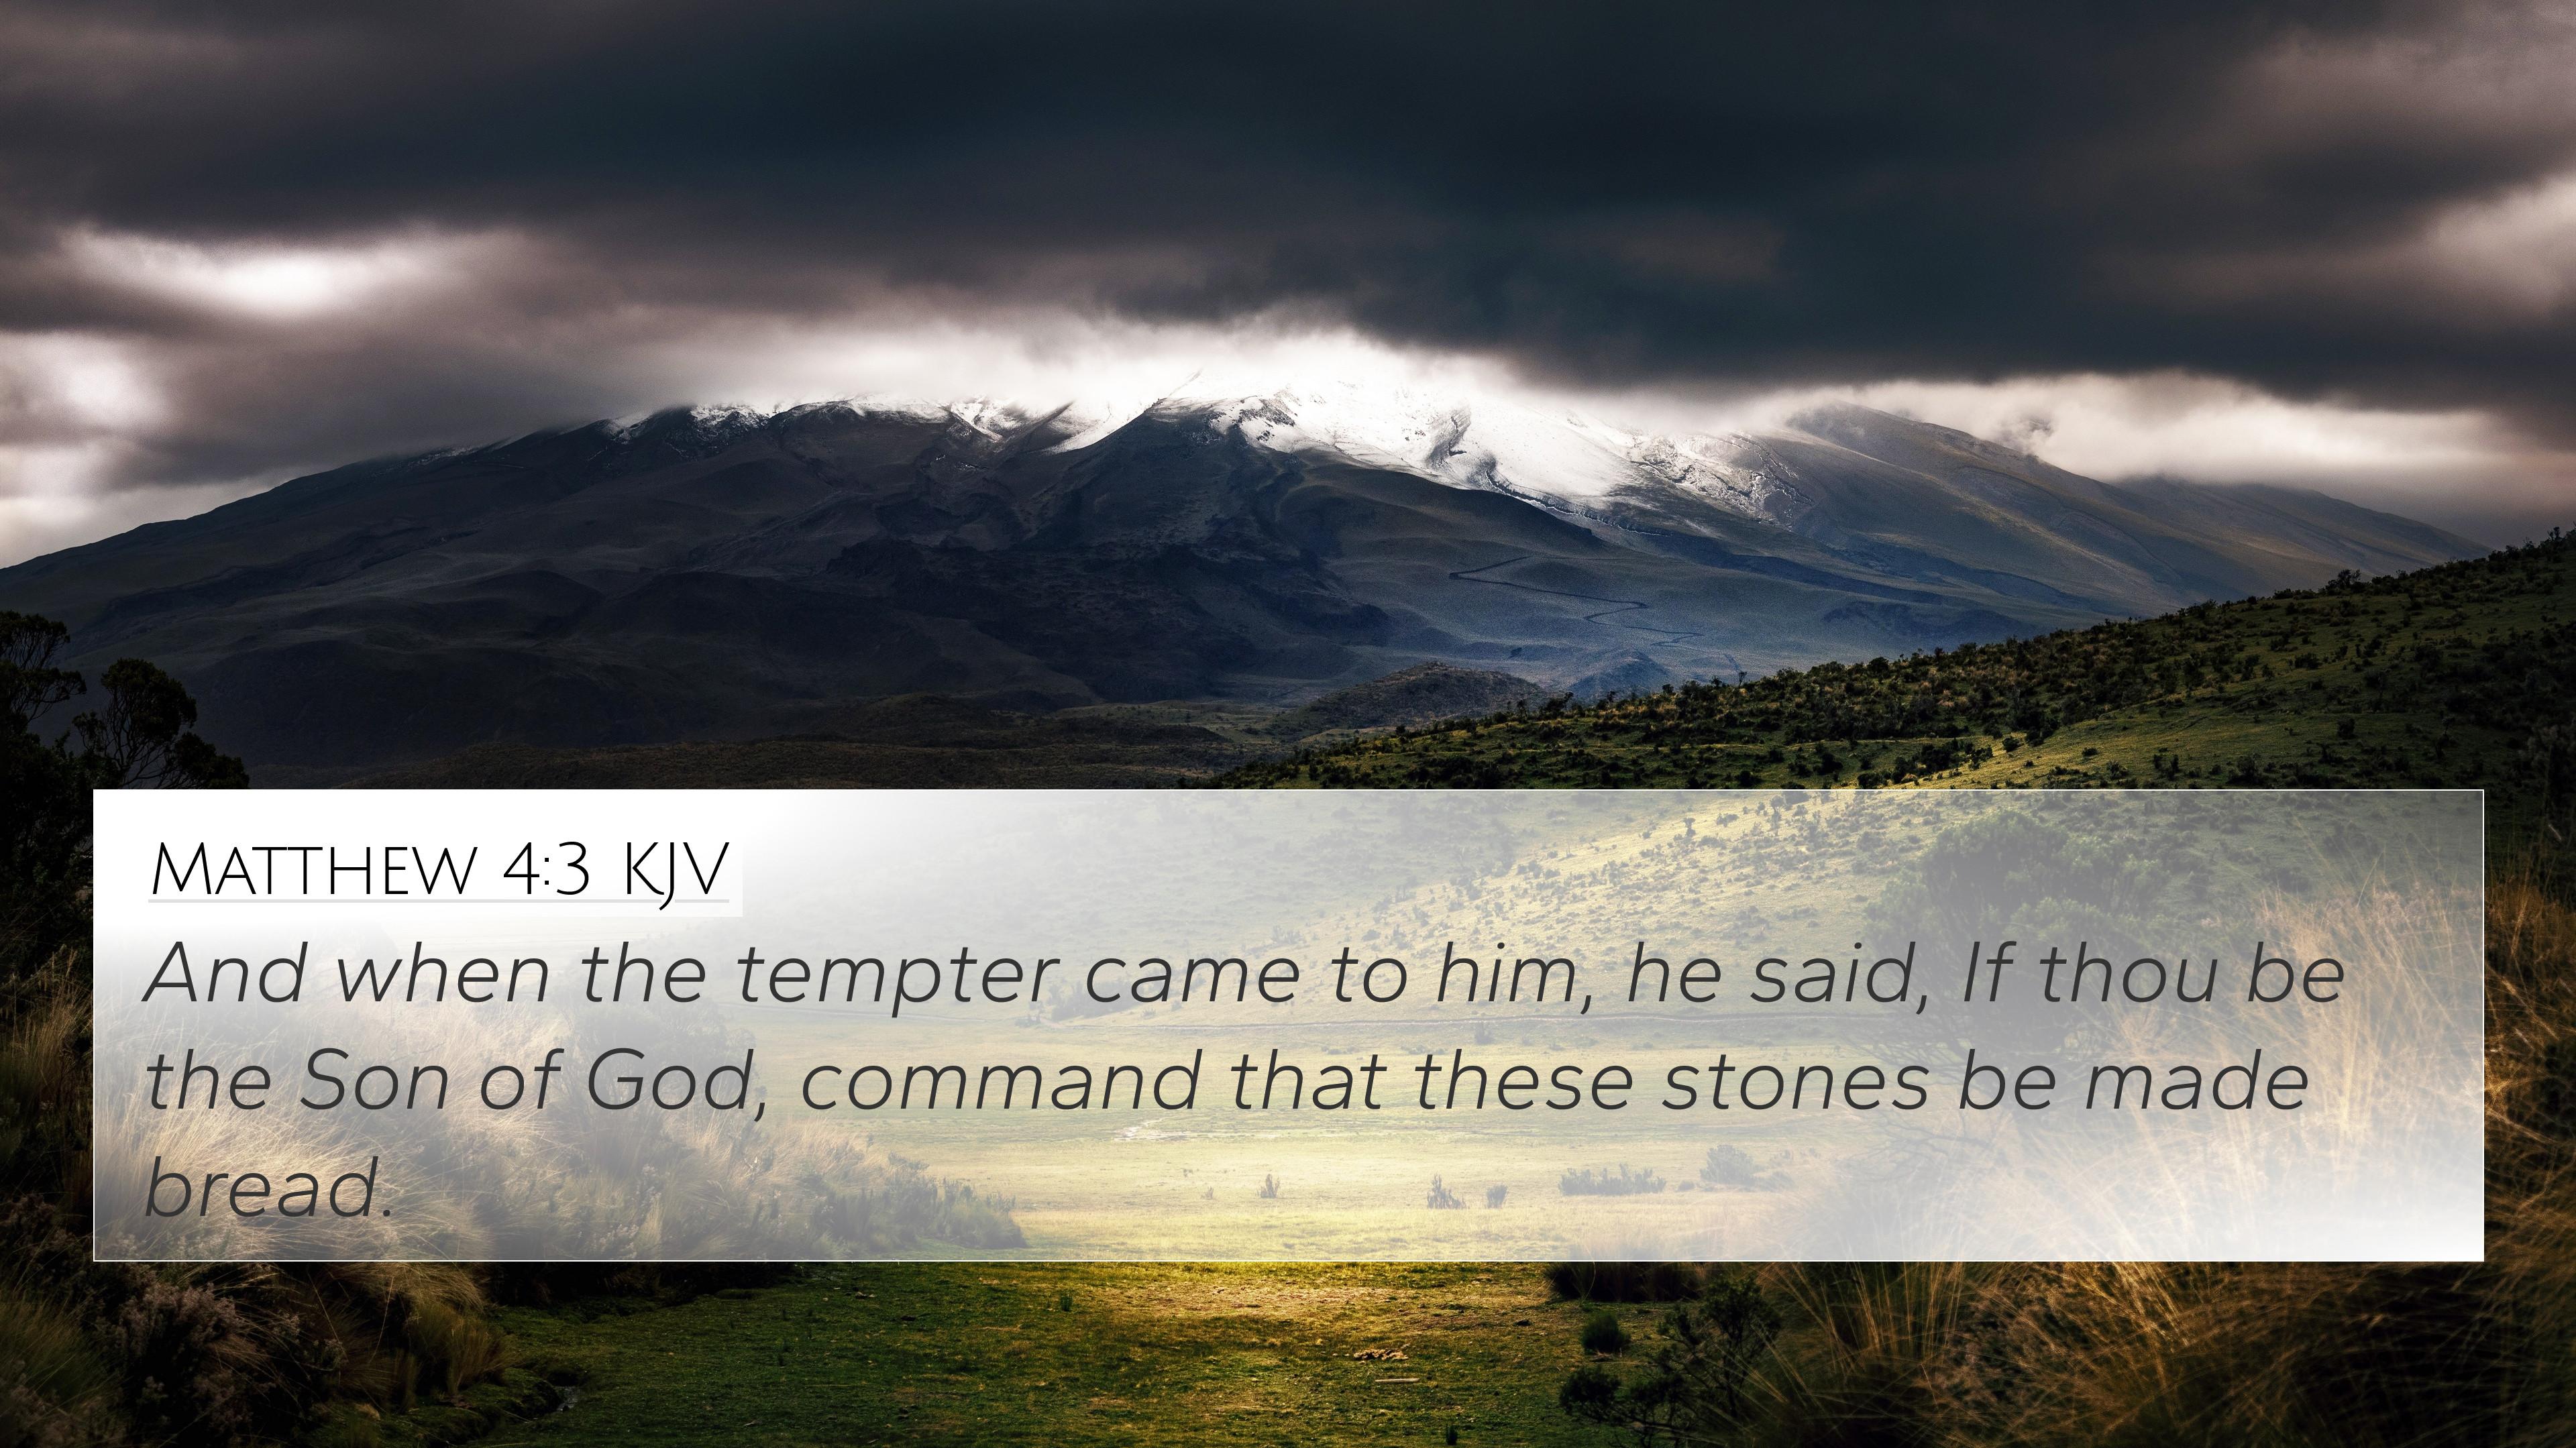 Matthew Kjv 4k Wallpaper And When The Tempter Came To Him